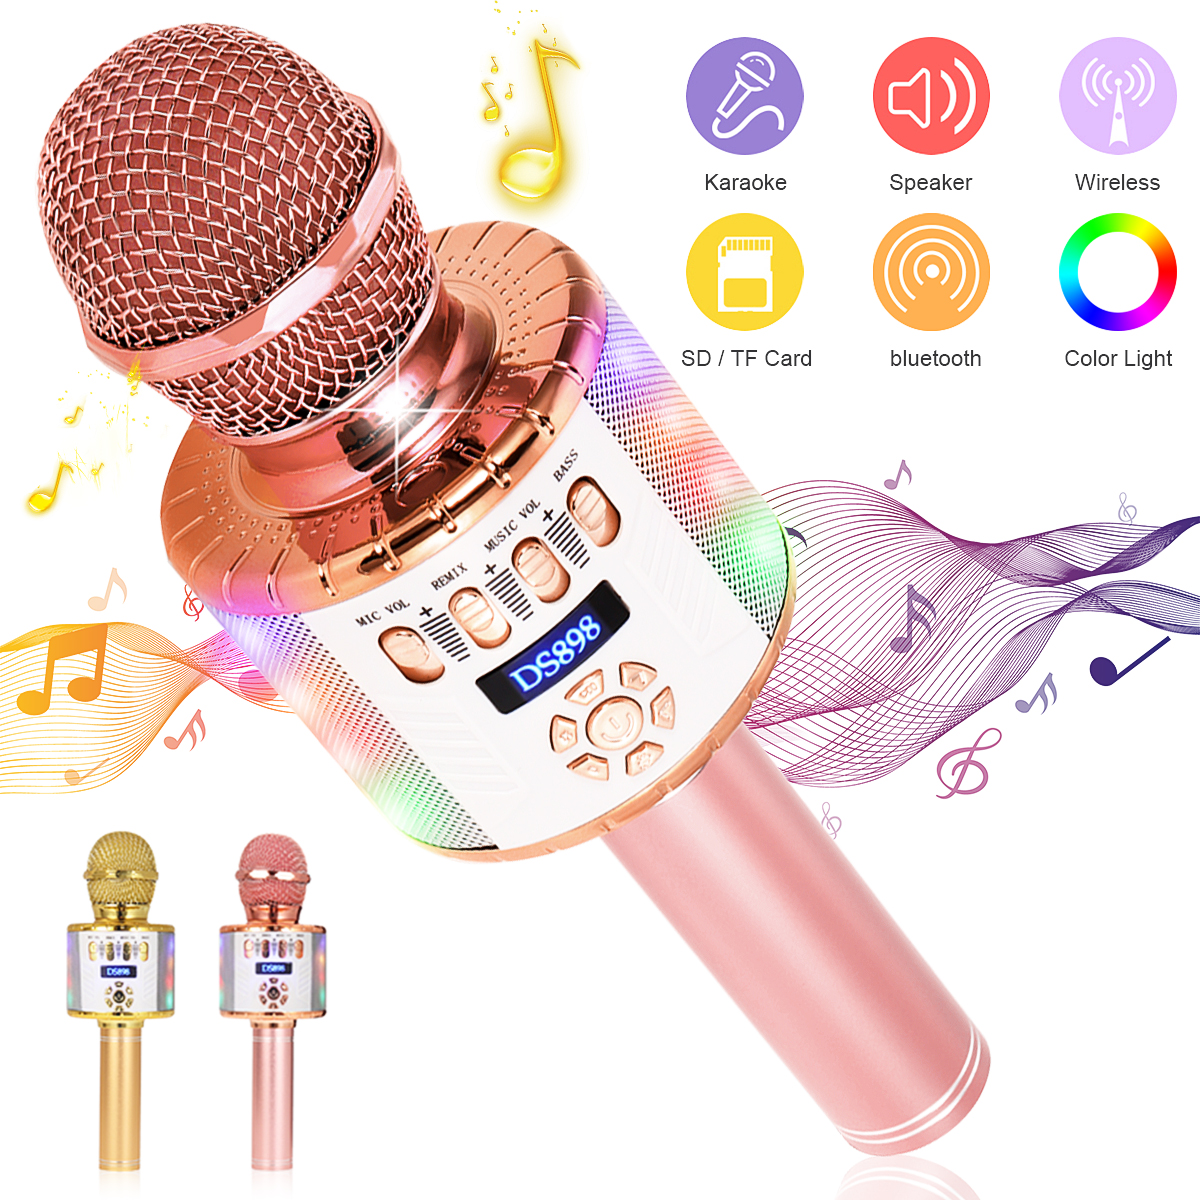 Bakeey-DS898-3-in-1-Microphone-Wireless-bluetooth-Microphone-bluetooth-Speaker-Recorder-HIFI-Noise-R-1804578-1